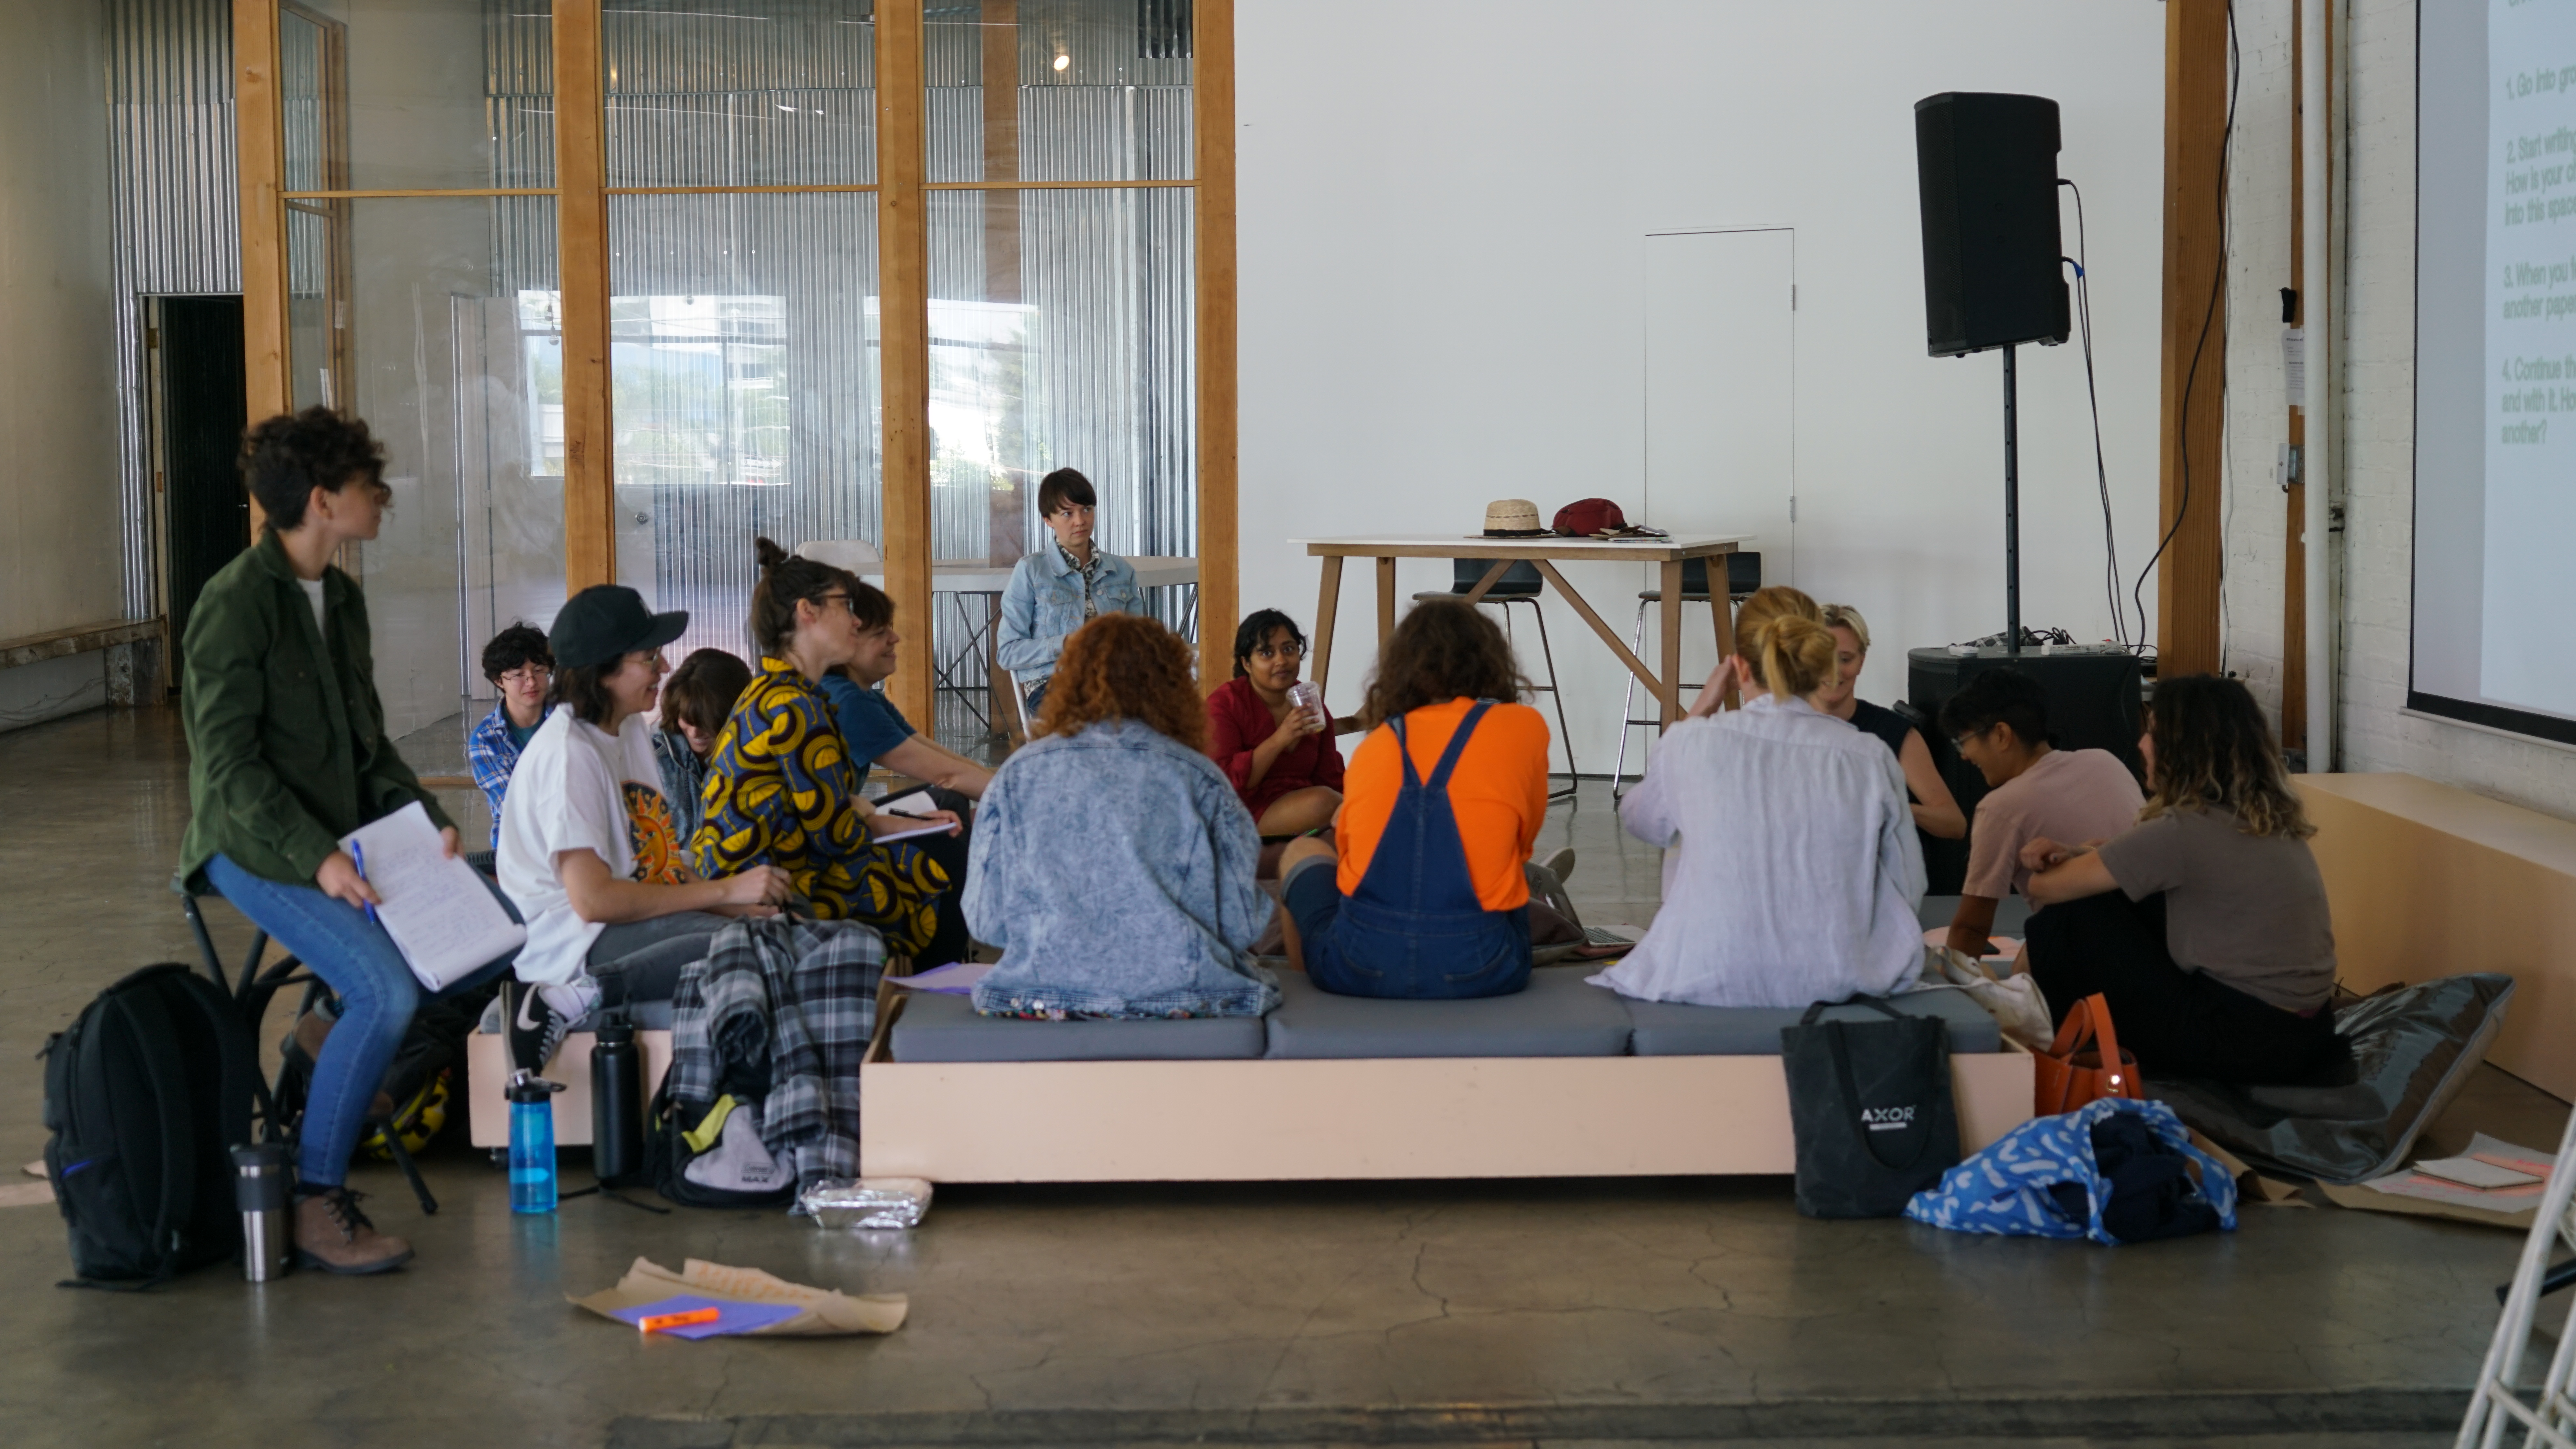 TWAH (=These Worlds Are Here) Workshop at NAVEL July 4-7 2019 (Image Credit: Larin Sullivan)